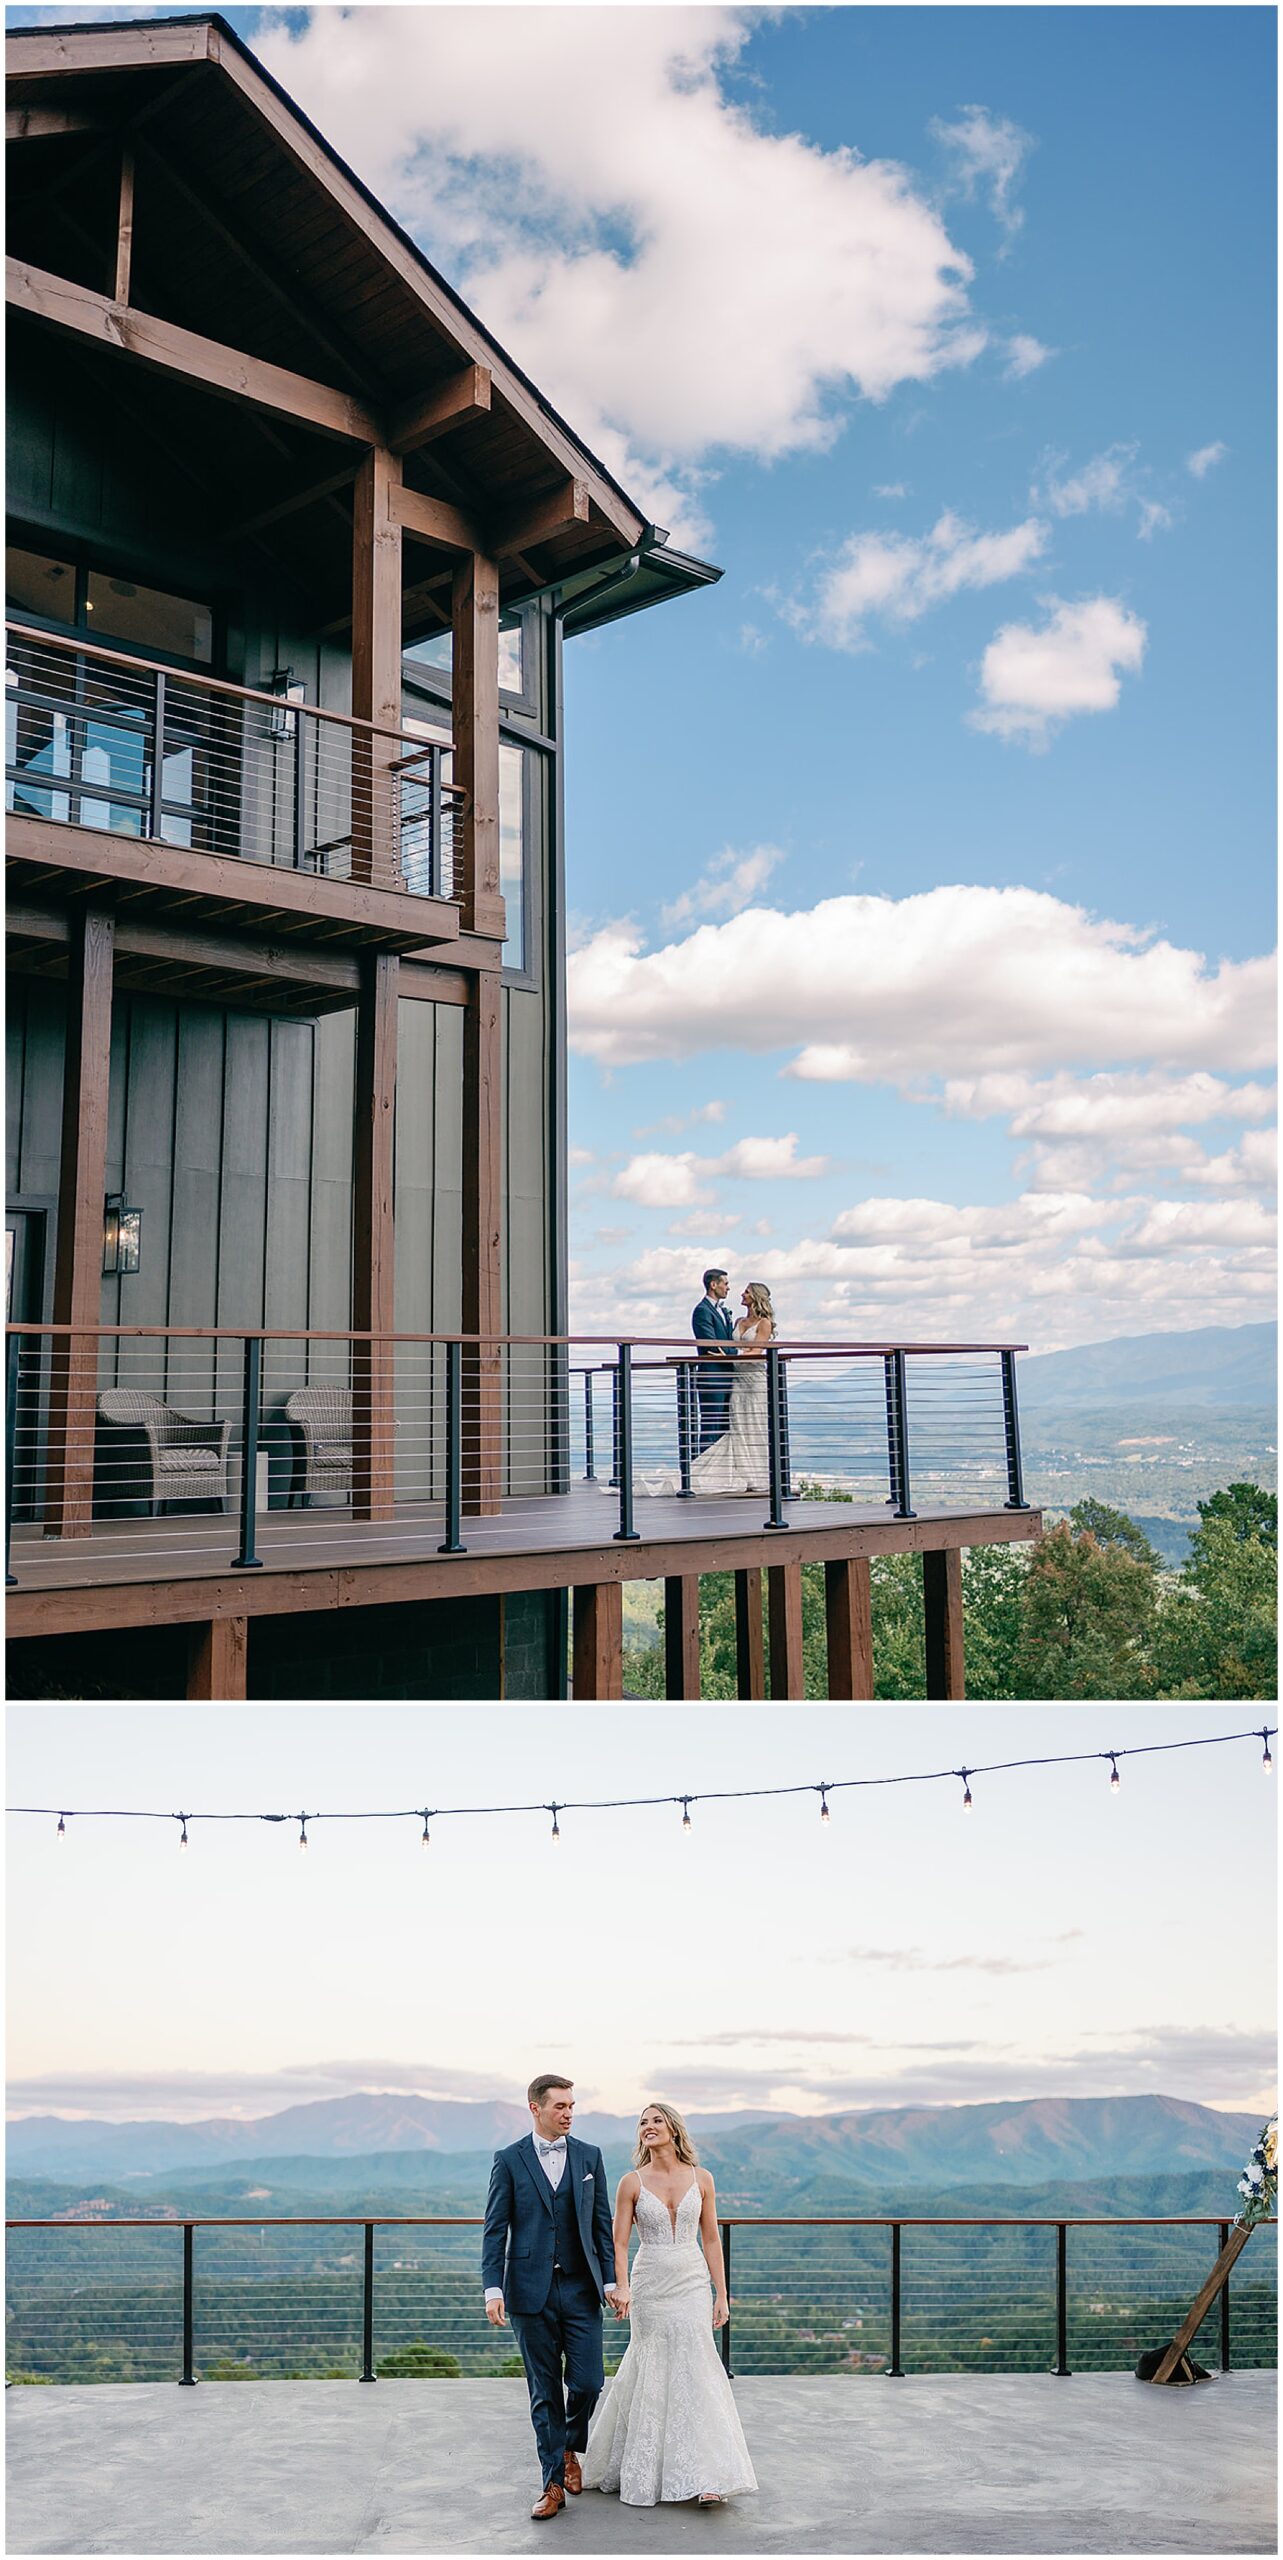 Newlyweds stand on the patio deck and hold hands while walking overlooking the mountains